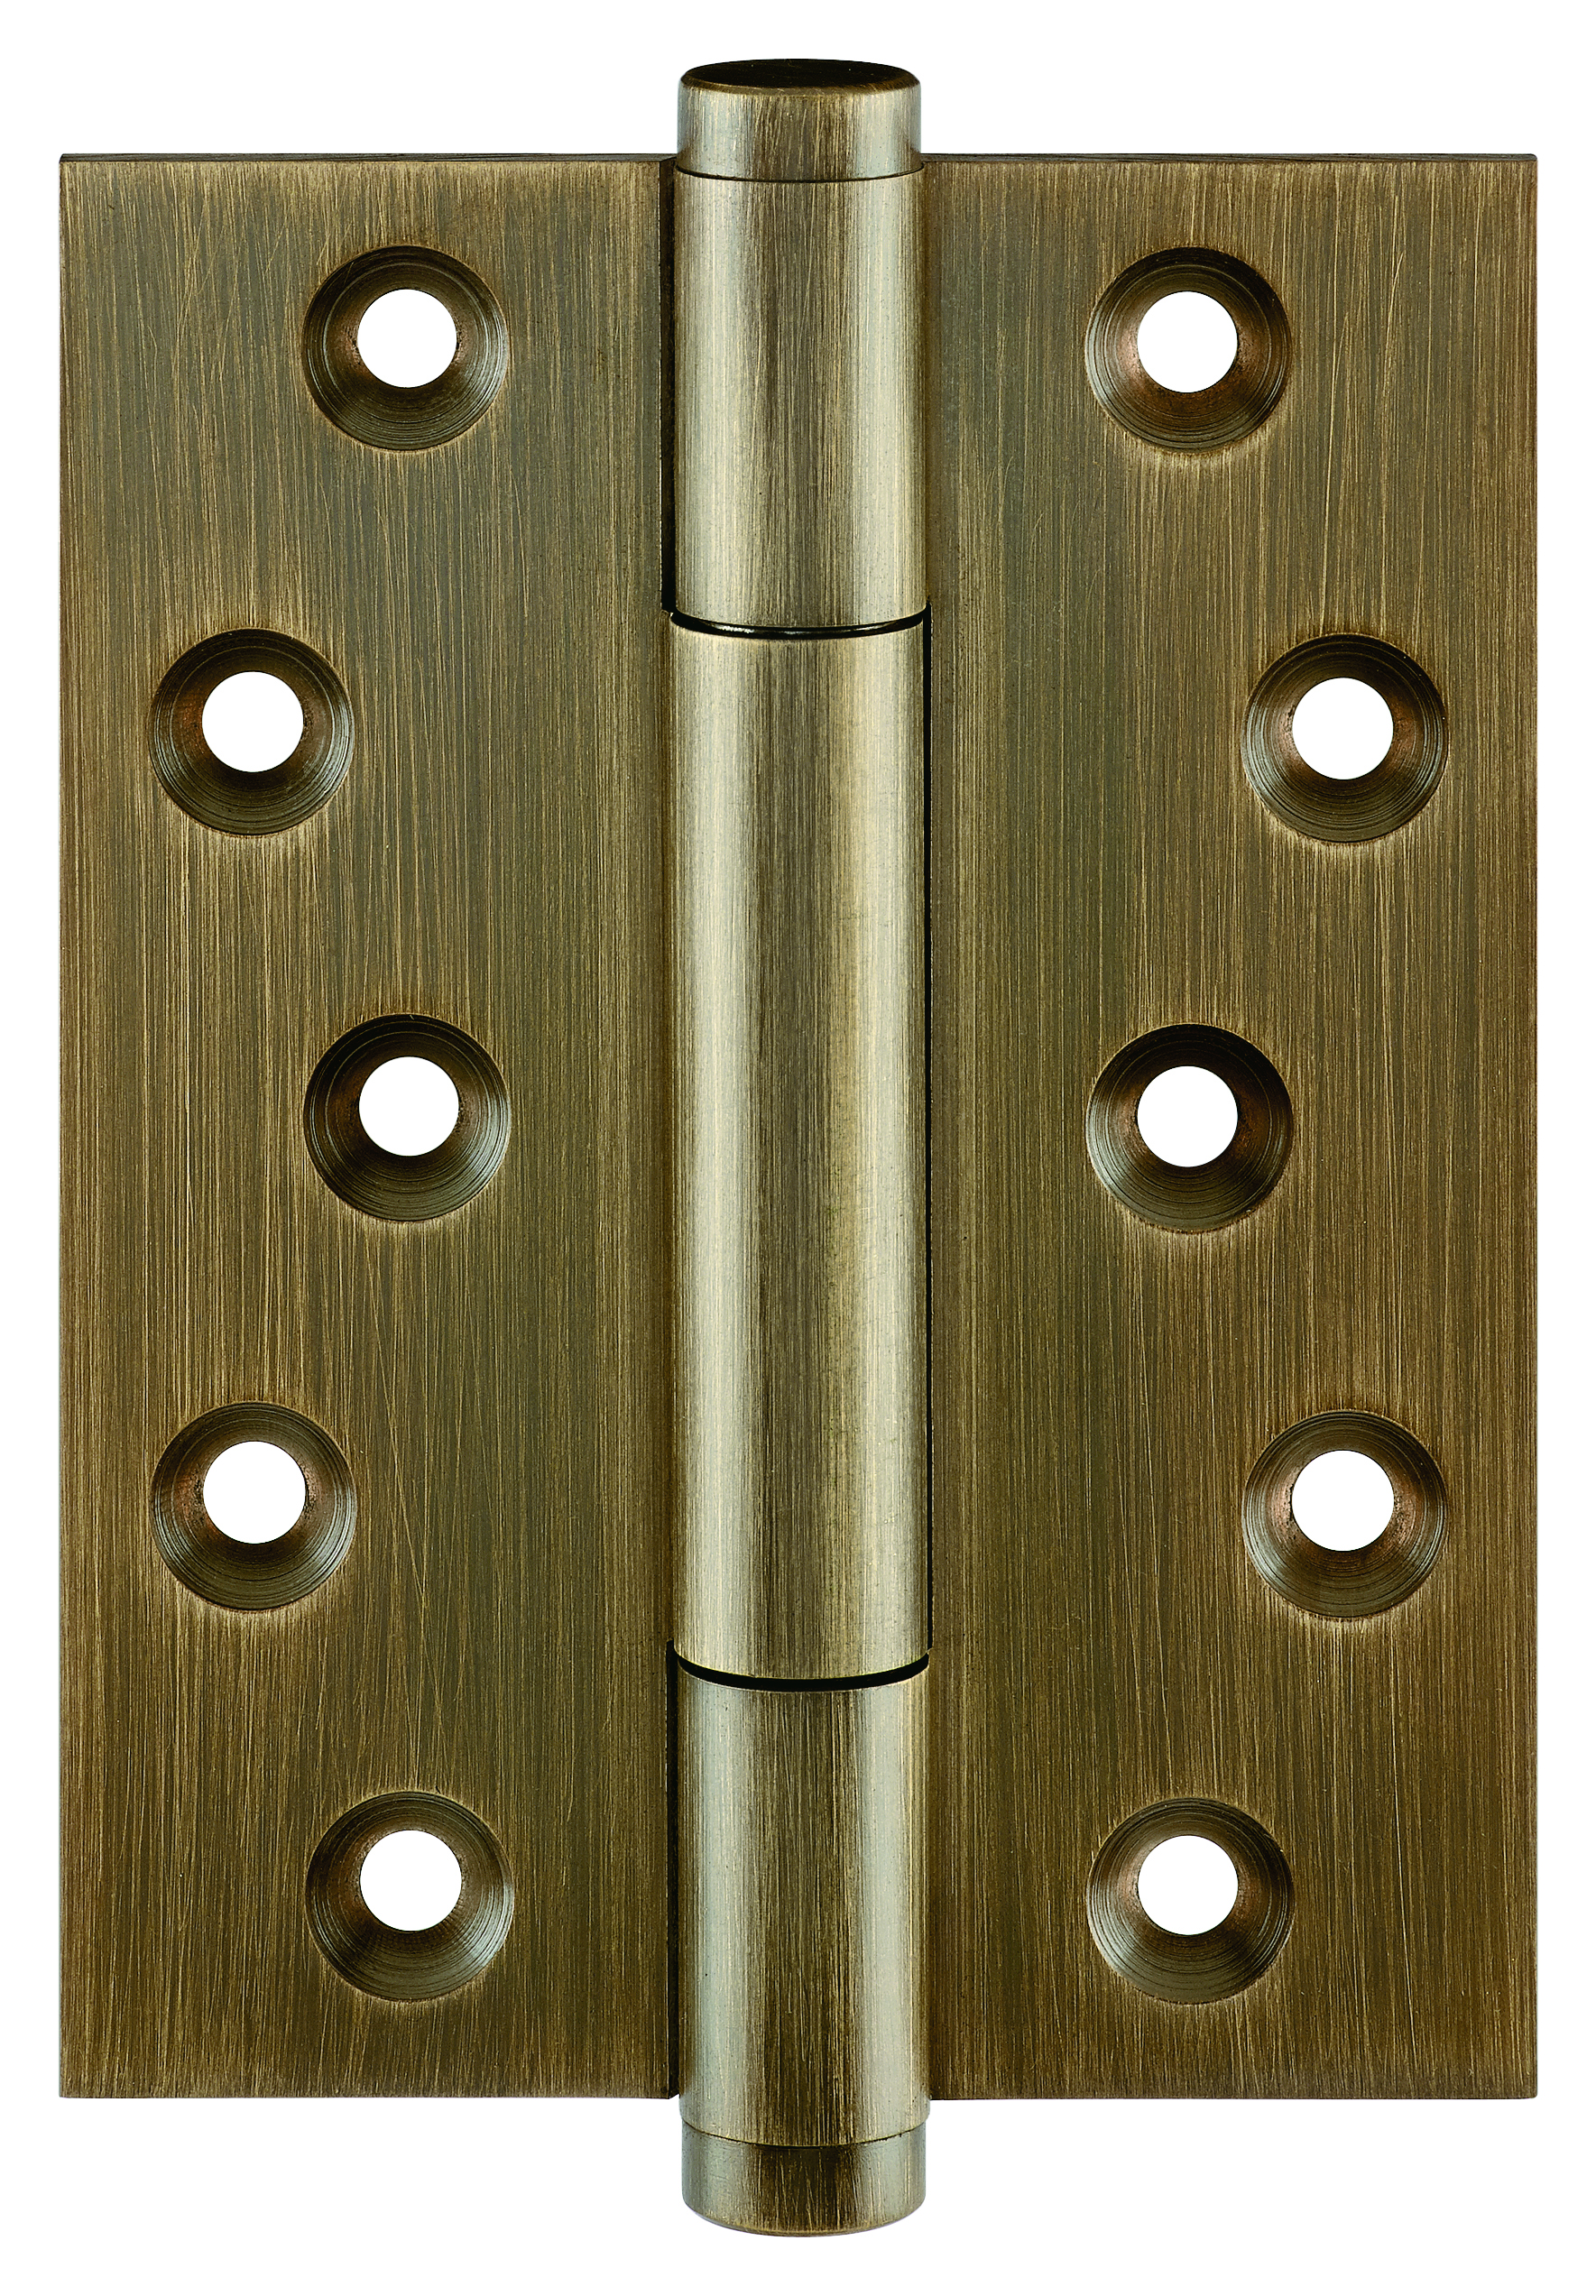 TRITECH Concealed Bearing High Performance Hinges inc Screws - 100 x 75mm